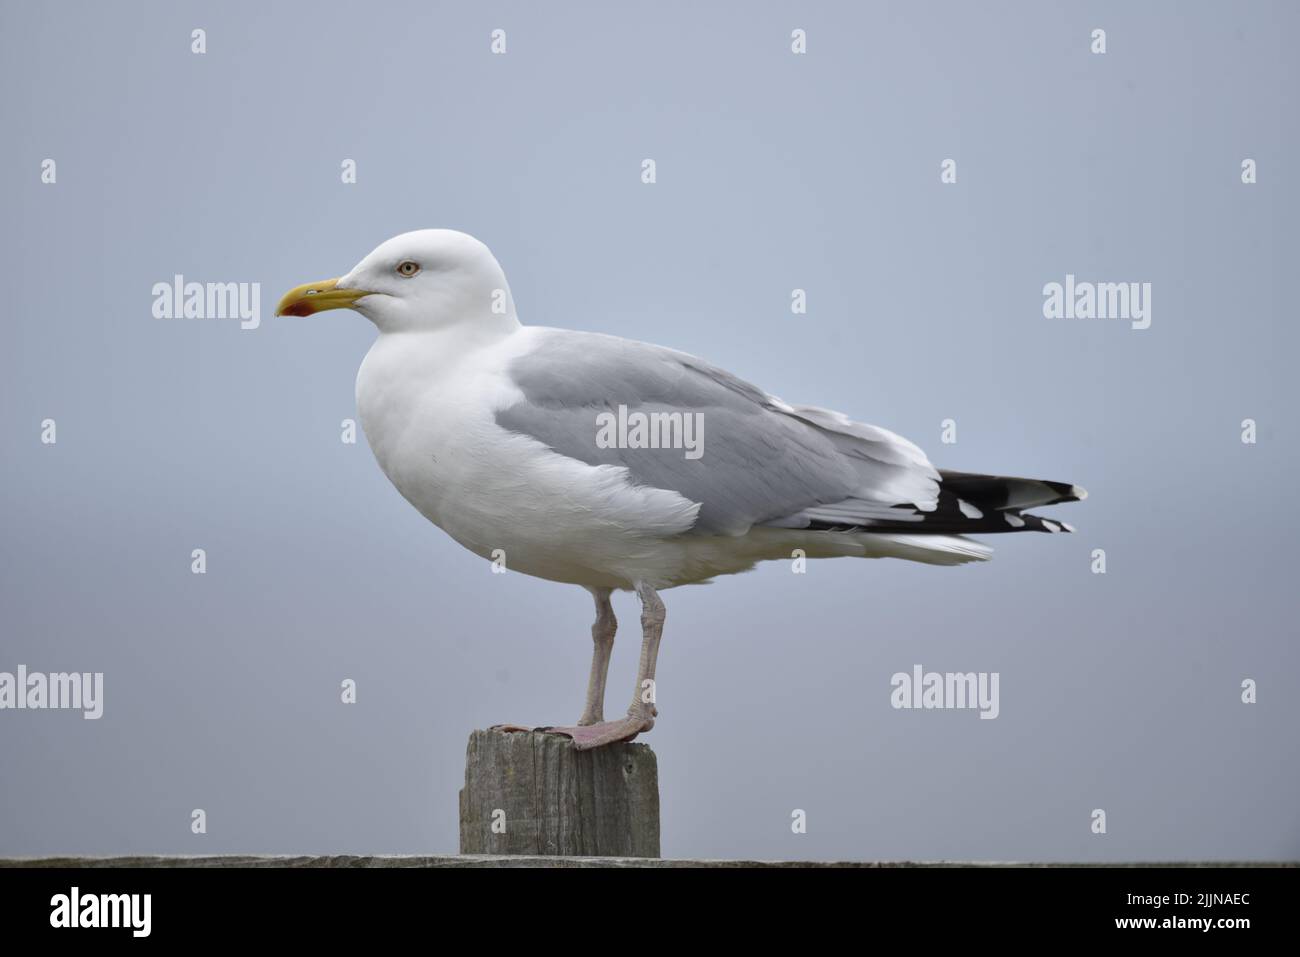 Close-Up Left-Profile Image of a European Herring Gull (Larus argentatus) Perched on Top of a Wooden Stump on a Bright Day on the Isle of Man, UK Stock Photo